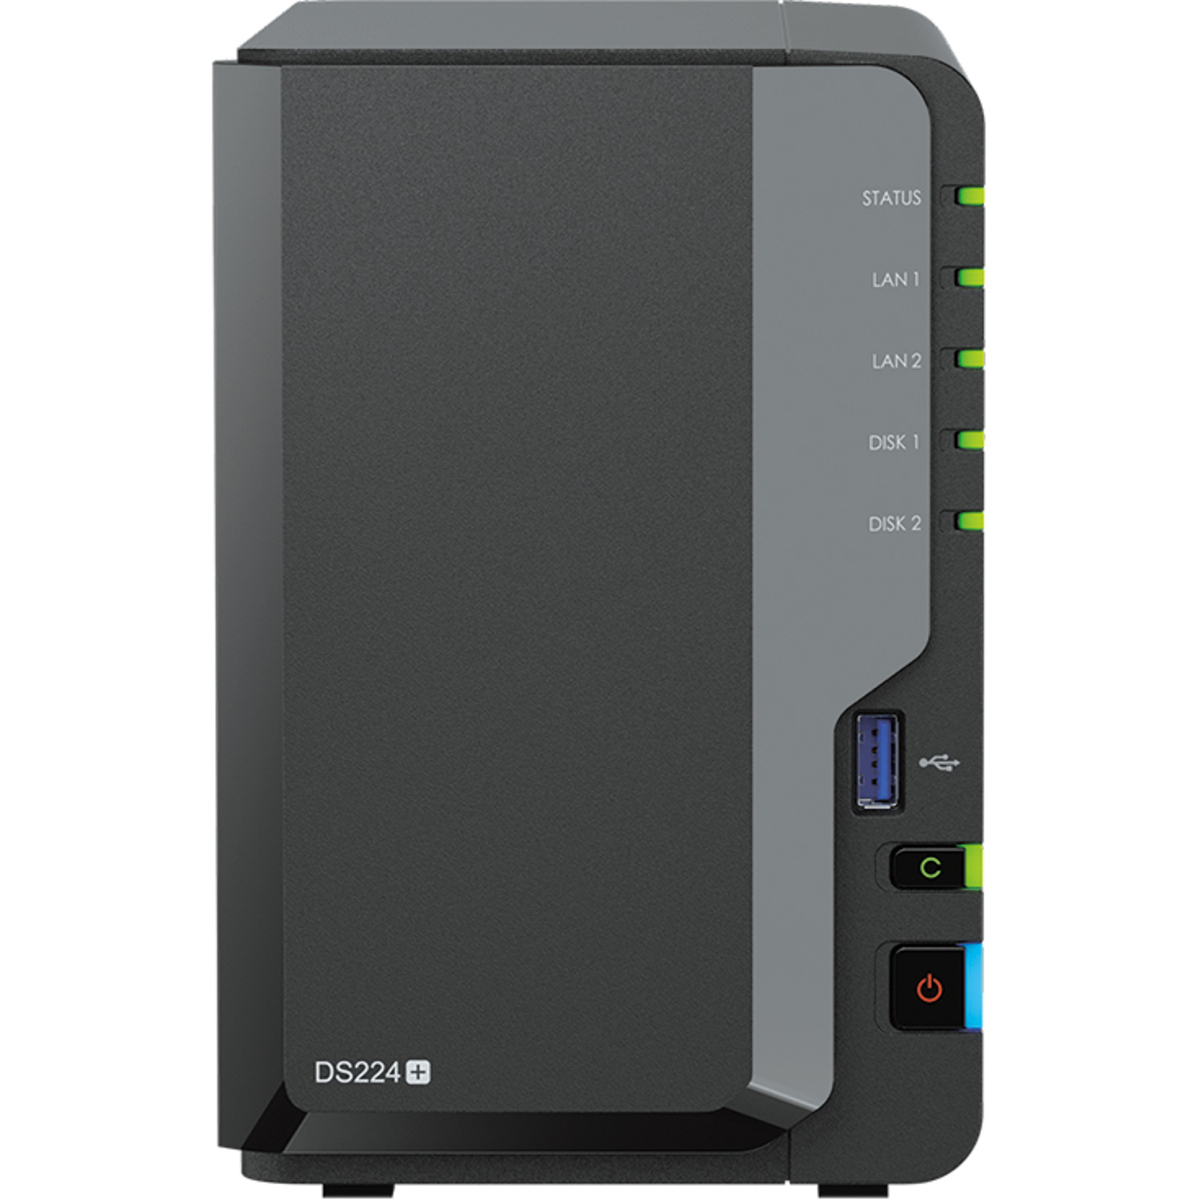 Synology DiskStation DS224+ 48tb 2-Bay Desktop Personal / Basic Home / Small Office NAS - Network Attached Storage Device 2x24tb Western Digital Ultrastar HC580 WUH722424ALE6L4 3.5 7200rpm SATA 6Gb/s HDD ENTERPRISE Class Drives Installed - Burn-In Tested - ON SALE - FREE RAM UPGRADE DiskStation DS224+